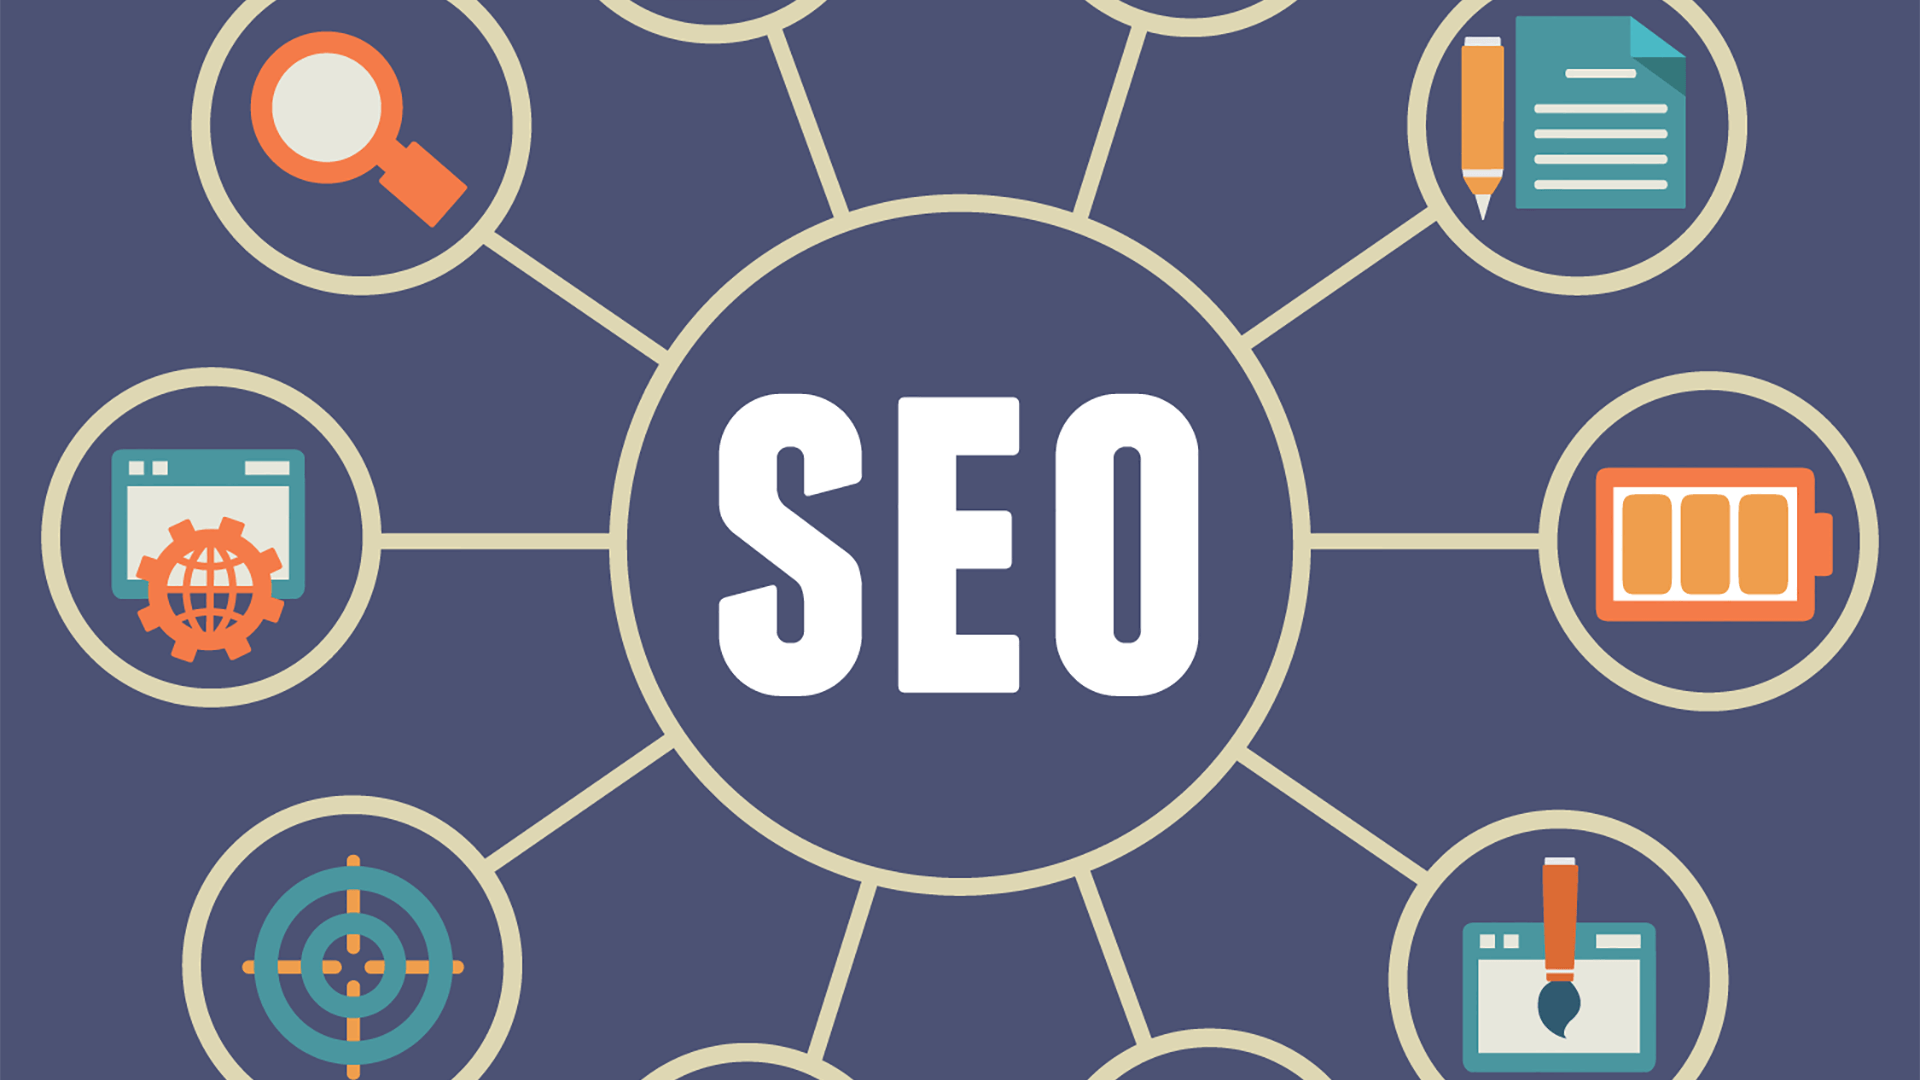 Maximizing Your Online Visibility: Top Tips to Improve Your SEO Ranking